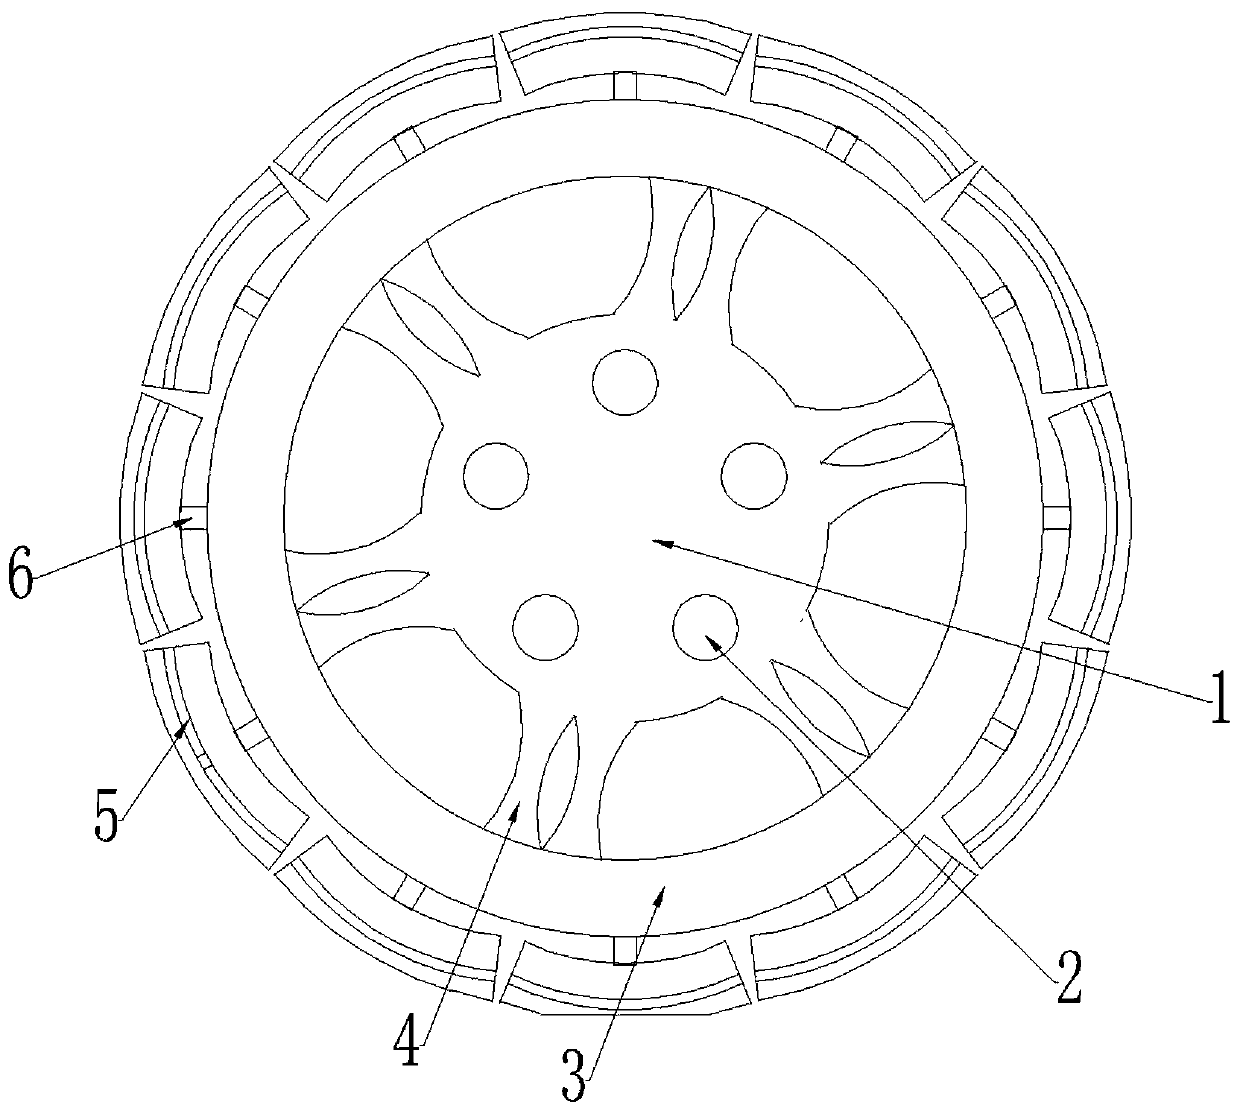 Anti-skidding device applied to automobile tires